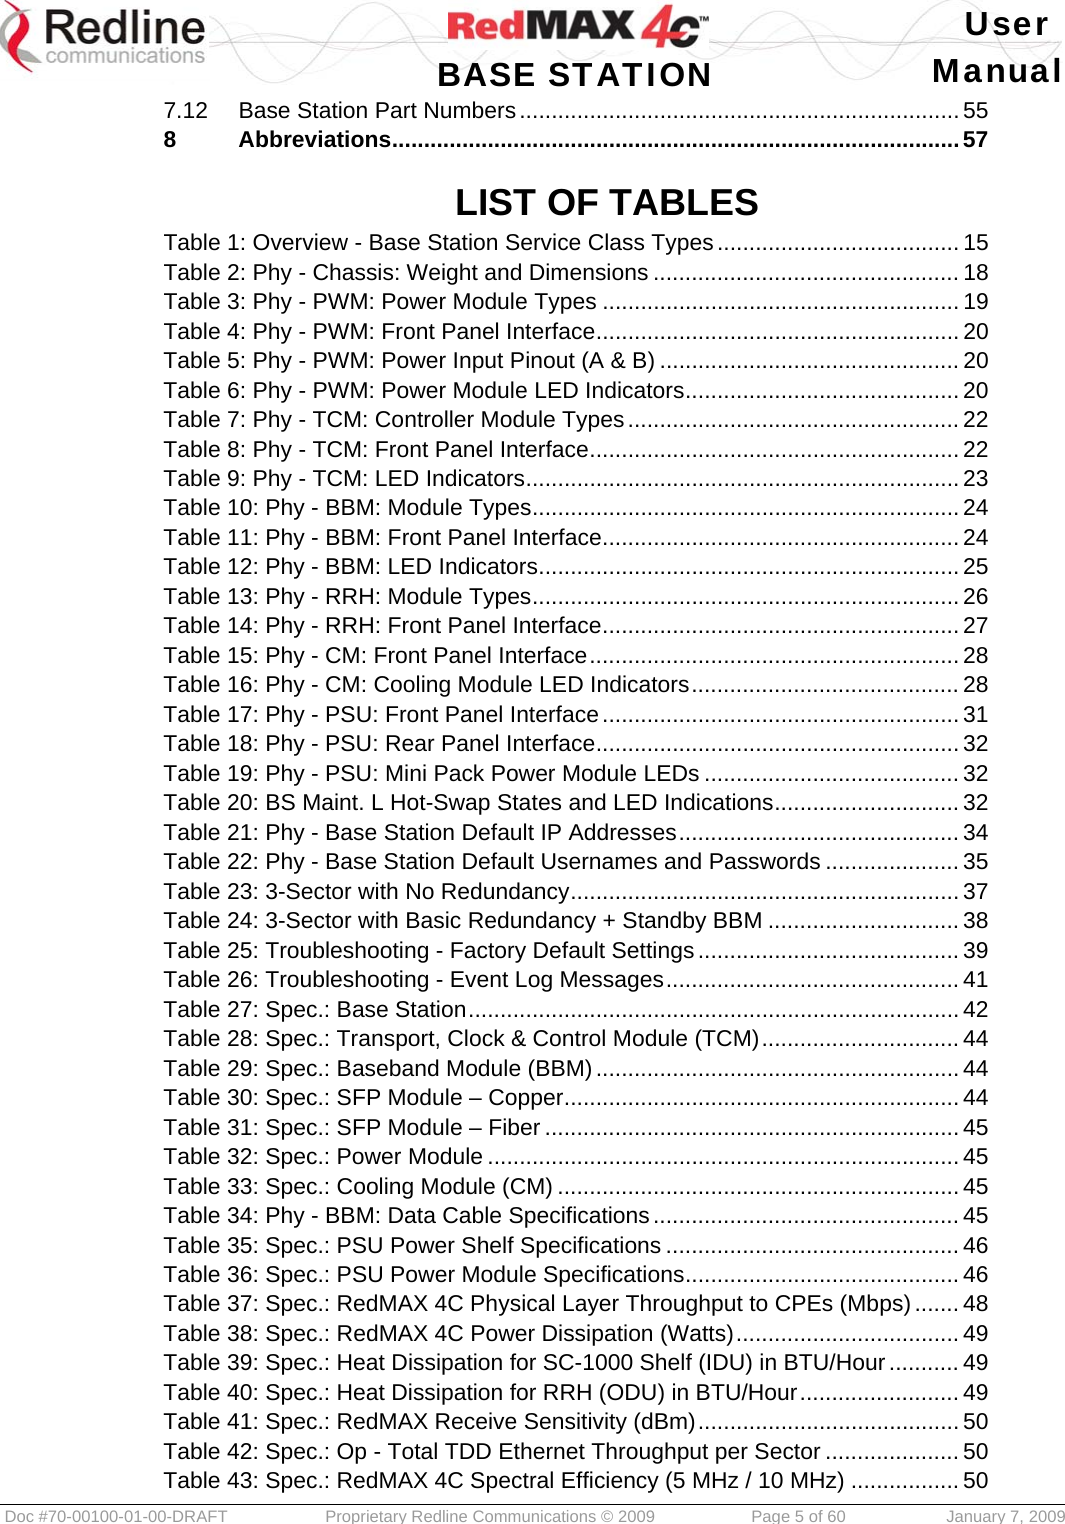   User  BASE STATION Manual  Doc #70-00100-01-00-DRAFT  Proprietary Redline Communications © 2009   Page 5 of 60  January 7, 2009 7.12Base Station Part Numbers ..................................................................... 558Abbreviations ......................................................................................... 57  LIST OF TABLES Table 1: Overview - Base Station Service Class Types ...................................... 15Table 2: Phy - Chassis: Weight and Dimensions ................................................ 18Table 3: Phy - PWM: Power Module Types ........................................................ 19Table 4: Phy - PWM: Front Panel Interface ......................................................... 20Table 5: Phy - PWM: Power Input Pinout (A &amp; B) ............................................... 20Table 6: Phy - PWM: Power Module LED Indicators ........................................... 20Table 7: Phy - TCM: Controller Module Types .................................................... 22Table 8: Phy - TCM: Front Panel Interface .......................................................... 22Table 9: Phy - TCM: LED Indicators .................................................................... 23Table 10: Phy - BBM: Module Types ................................................................... 24Table 11: Phy - BBM: Front Panel Interface ........................................................ 24Table 12: Phy - BBM: LED Indicators .................................................................. 25Table 13: Phy - RRH: Module Types ................................................................... 26Table 14: Phy - RRH: Front Panel Interface ........................................................ 27Table 15: Phy - CM: Front Panel Interface .......................................................... 28Table 16: Phy - CM: Cooling Module LED Indicators .......................................... 28Table 17: Phy - PSU: Front Panel Interface ........................................................ 31Table 18: Phy - PSU: Rear Panel Interface ......................................................... 32Table 19: Phy - PSU: Mini Pack Power Module LEDs ........................................ 32Table 20: BS Maint. L Hot-Swap States and LED Indications ............................. 32Table 21: Phy - Base Station Default IP Addresses ............................................ 34Table 22: Phy - Base Station Default Usernames and Passwords ..................... 35Table 23: 3-Sector with No Redundancy ............................................................. 37Table 24: 3-Sector with Basic Redundancy + Standby BBM .............................. 38Table 25: Troubleshooting - Factory Default Settings ......................................... 39Table 26: Troubleshooting - Event Log Messages .............................................. 41Table 27: Spec.: Base Station ............................................................................. 42Table 28: Spec.: Transport, Clock &amp; Control Module (TCM) ............................... 44Table 29: Spec.: Baseband Module (BBM) ......................................................... 44Table 30: Spec.: SFP Module – Copper .............................................................. 44Table 31: Spec.: SFP Module – Fiber ................................................................. 45Table 32: Spec.: Power Module .......................................................................... 45Table 33: Spec.: Cooling Module (CM) ............................................................... 45Table 34: Phy - BBM: Data Cable Specifications ................................................ 45Table 35: Spec.: PSU Power Shelf Specifications .............................................. 46Table 36: Spec.: PSU Power Module Specifications ........................................... 46Table 37: Spec.: RedMAX 4C Physical Layer Throughput to CPEs (Mbps) ....... 48Table 38: Spec.: RedMAX 4C Power Dissipation (Watts) ................................... 49Table 39: Spec.: Heat Dissipation for SC-1000 Shelf (IDU) in BTU/Hour ........... 49Table 40: Spec.: Heat Dissipation for RRH (ODU) in BTU/Hour ......................... 49Table 41: Spec.: RedMAX Receive Sensitivity (dBm) ......................................... 50Table 42: Spec.: Op - Total TDD Ethernet Throughput per Sector ..................... 50Table 43: Spec.: RedMAX 4C Spectral Efficiency (5 MHz / 10 MHz) ................. 50